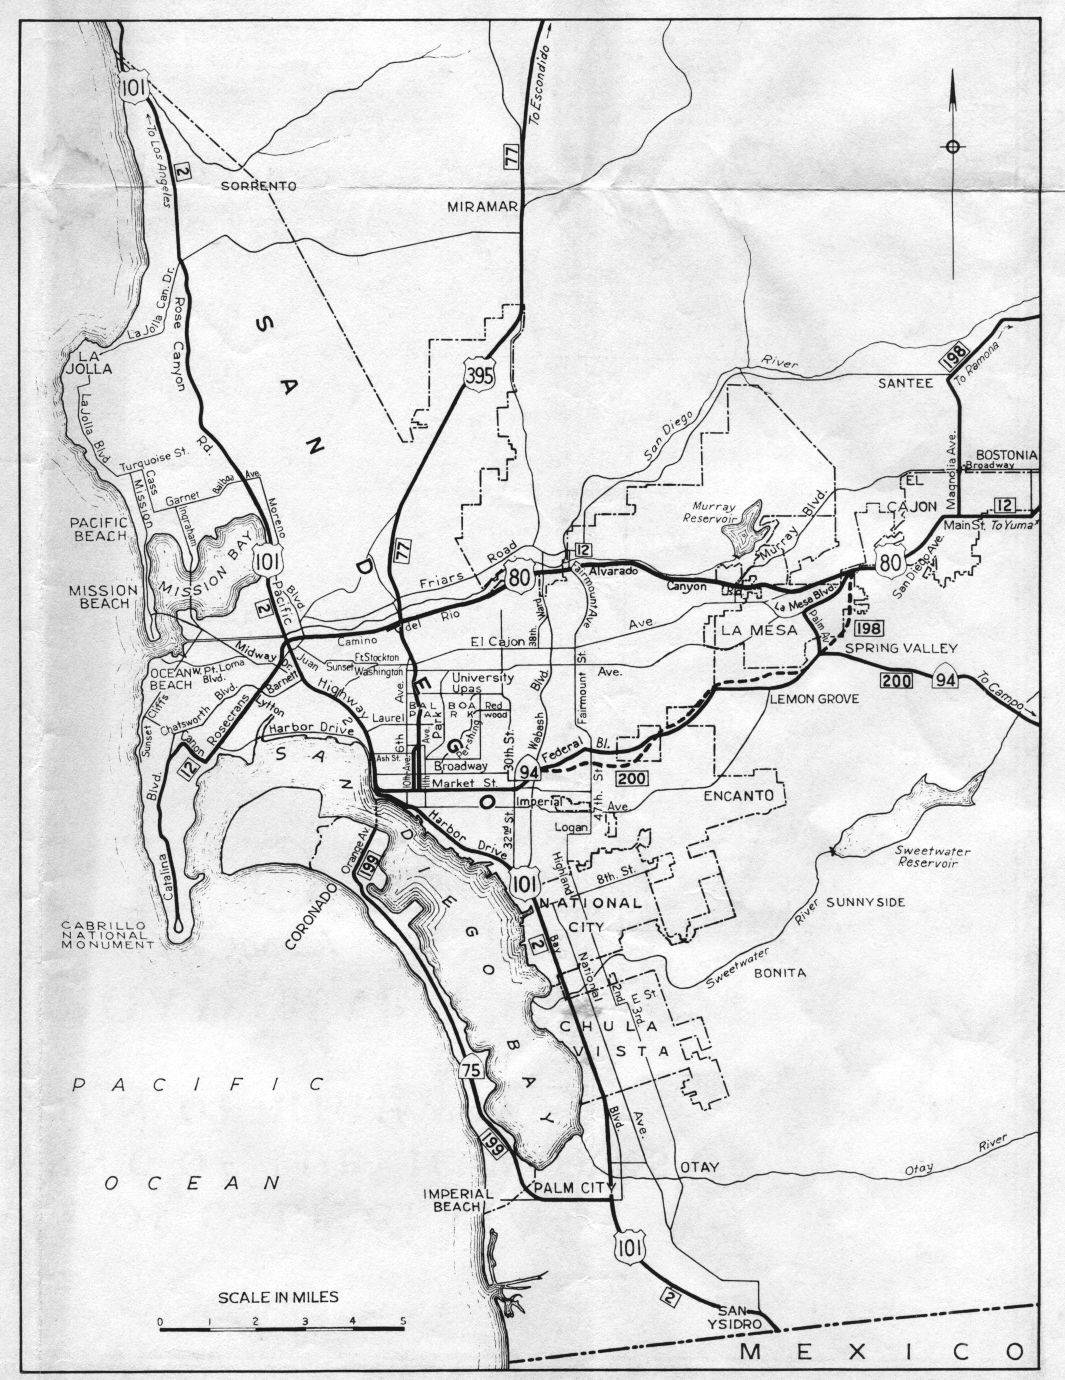 Official detail map for San Diego (1956)